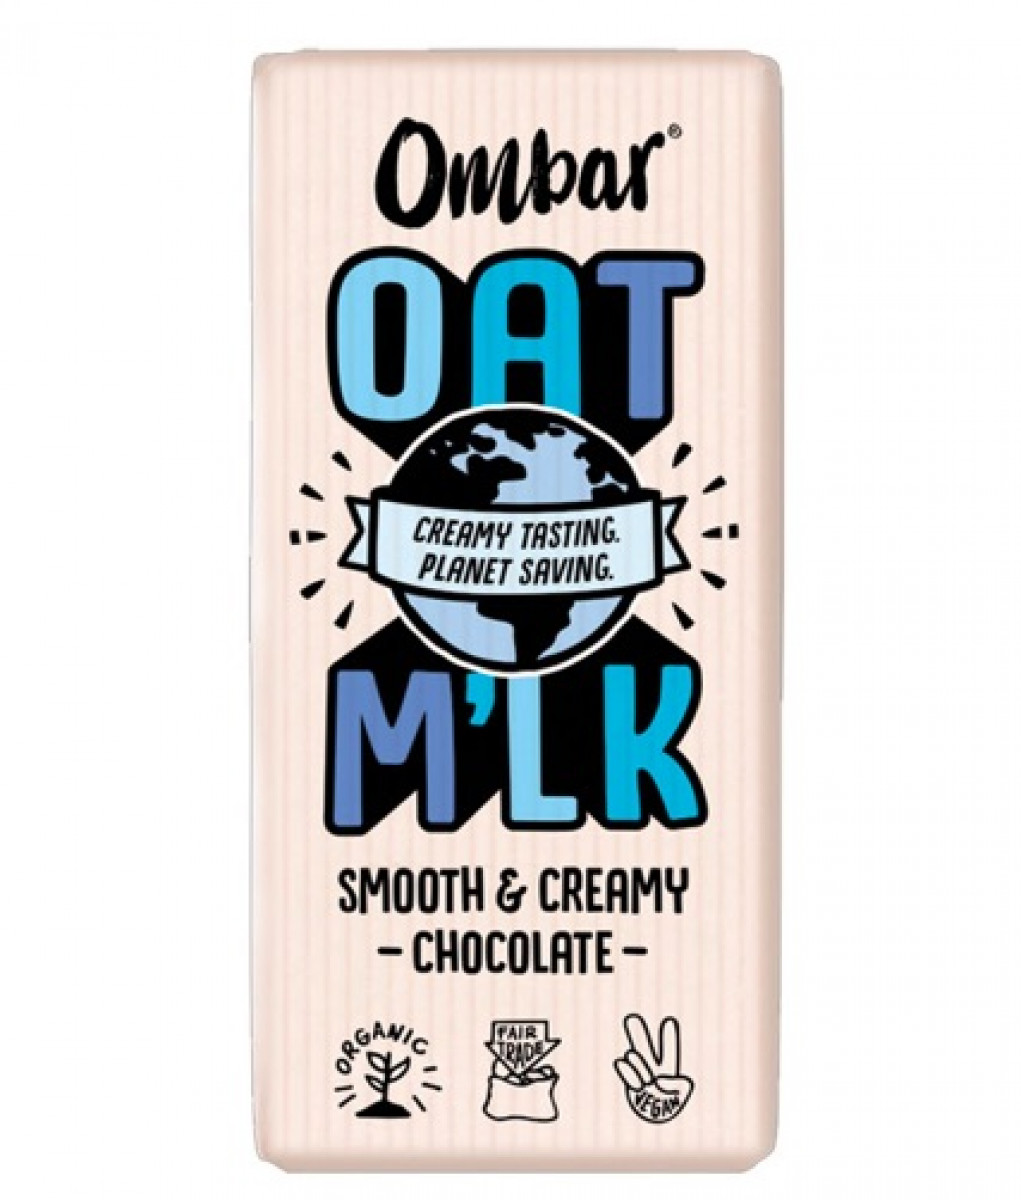 Product picture for Oat M'lk Original Smooth and Creamy